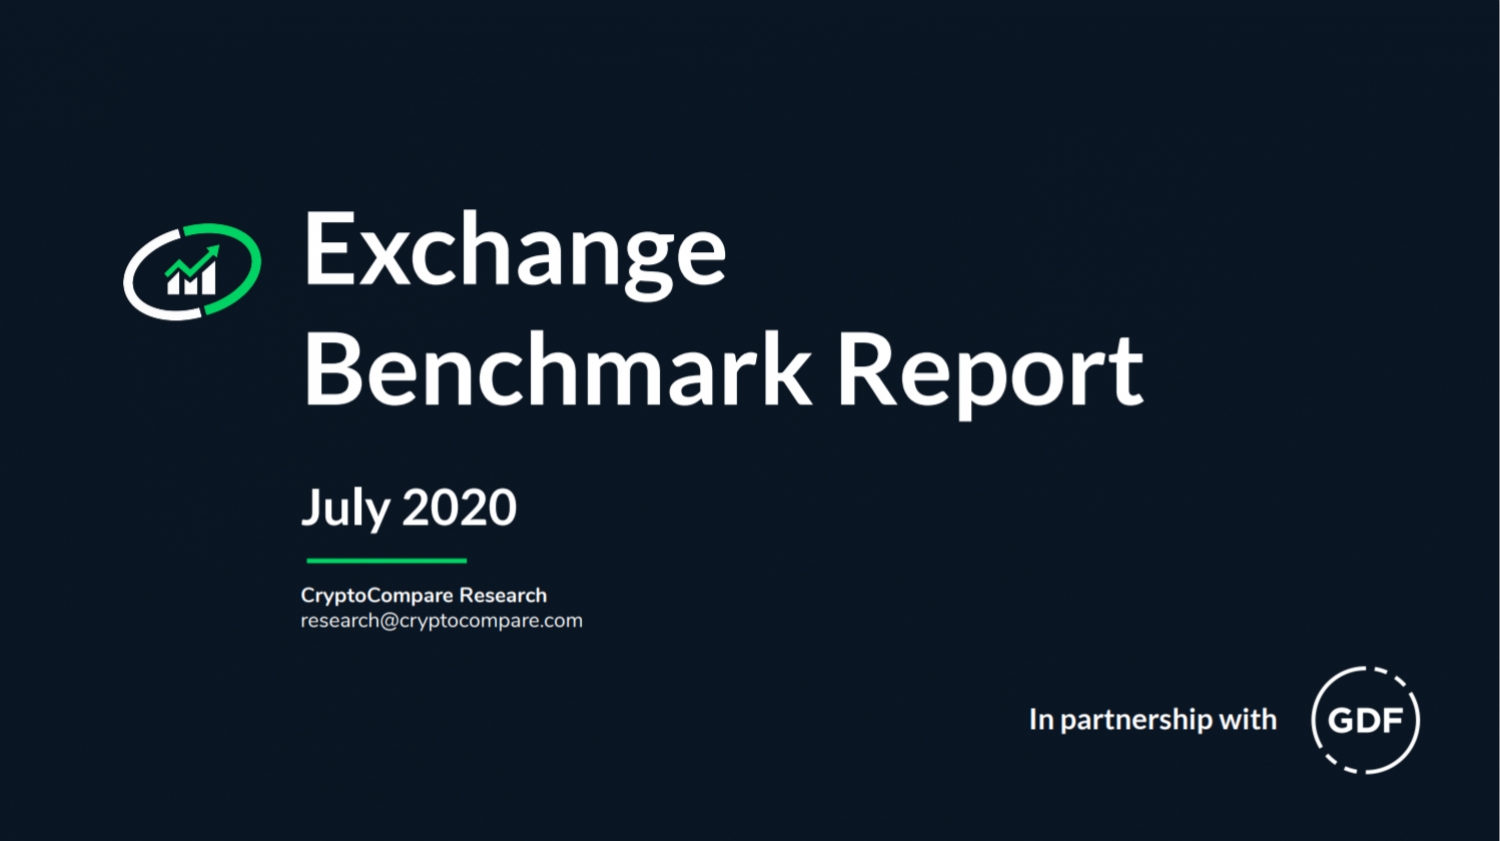 CRYPTOCOMPARE EXCHANGE BENCHMARK JULY 2020